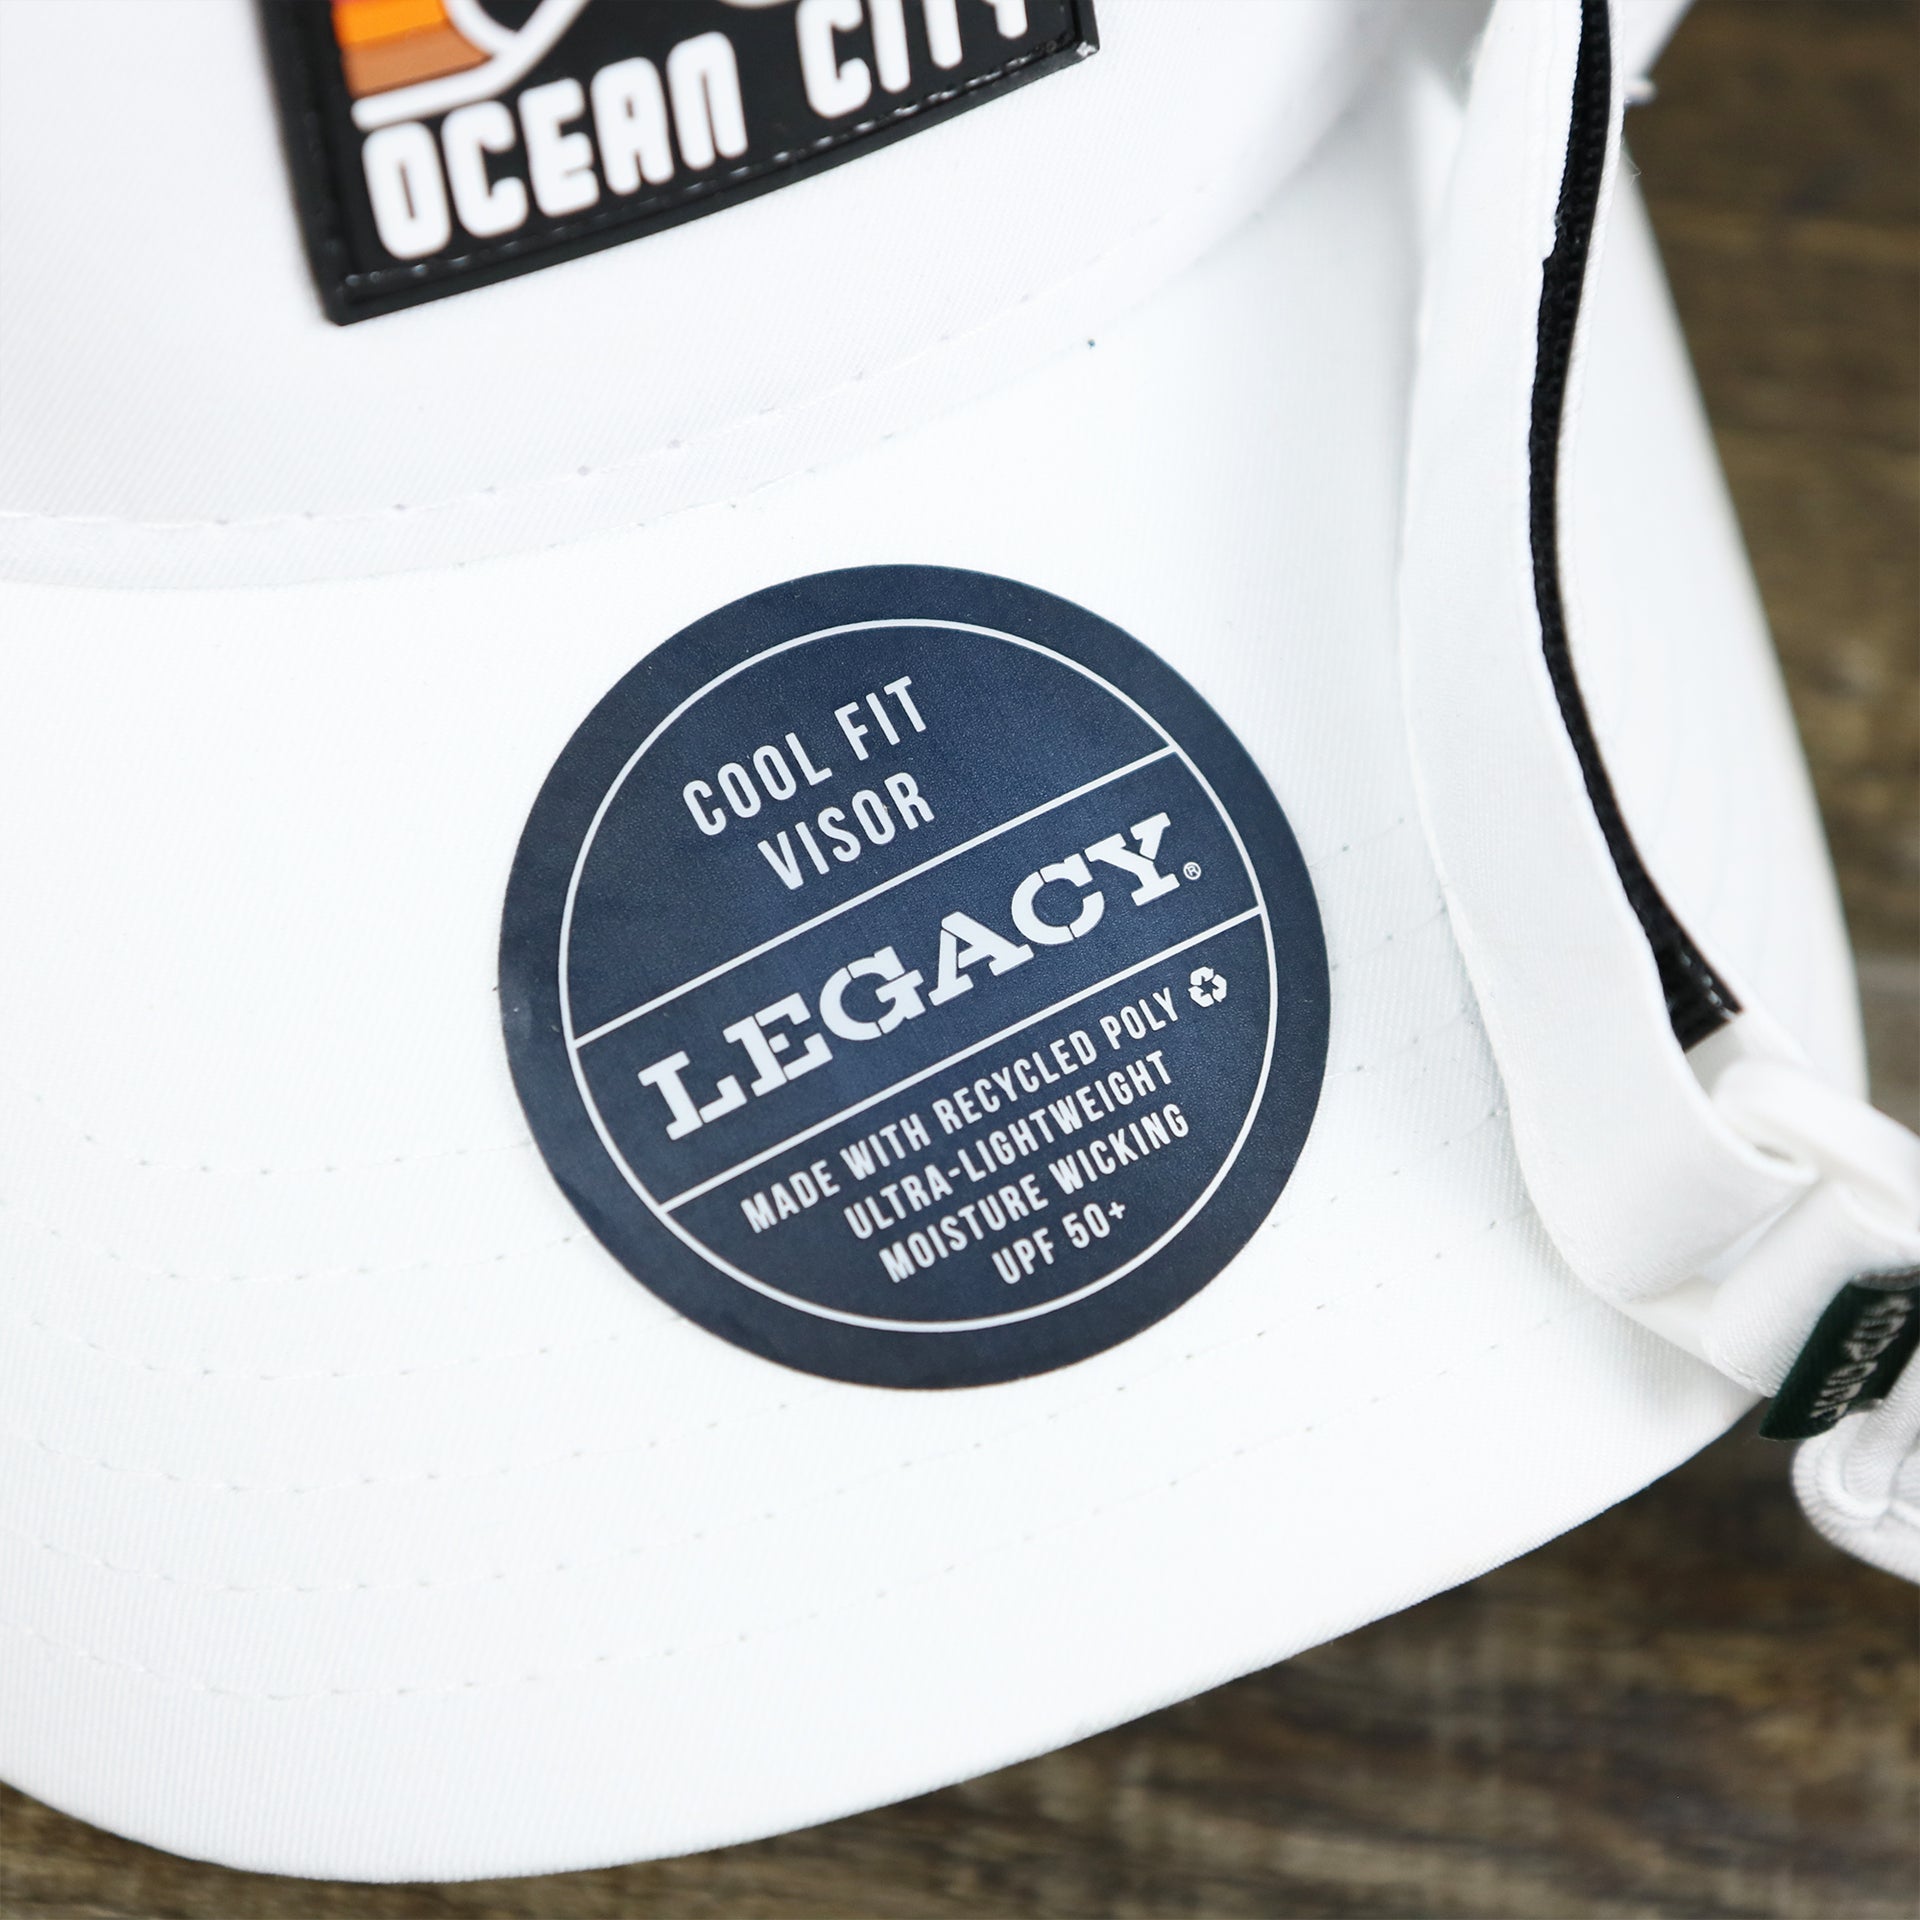 The Legacy Sticker on the New Jersey High Point PVC Ocean City Rubber Patch Cool Fit Adjustable Visor | White Visor